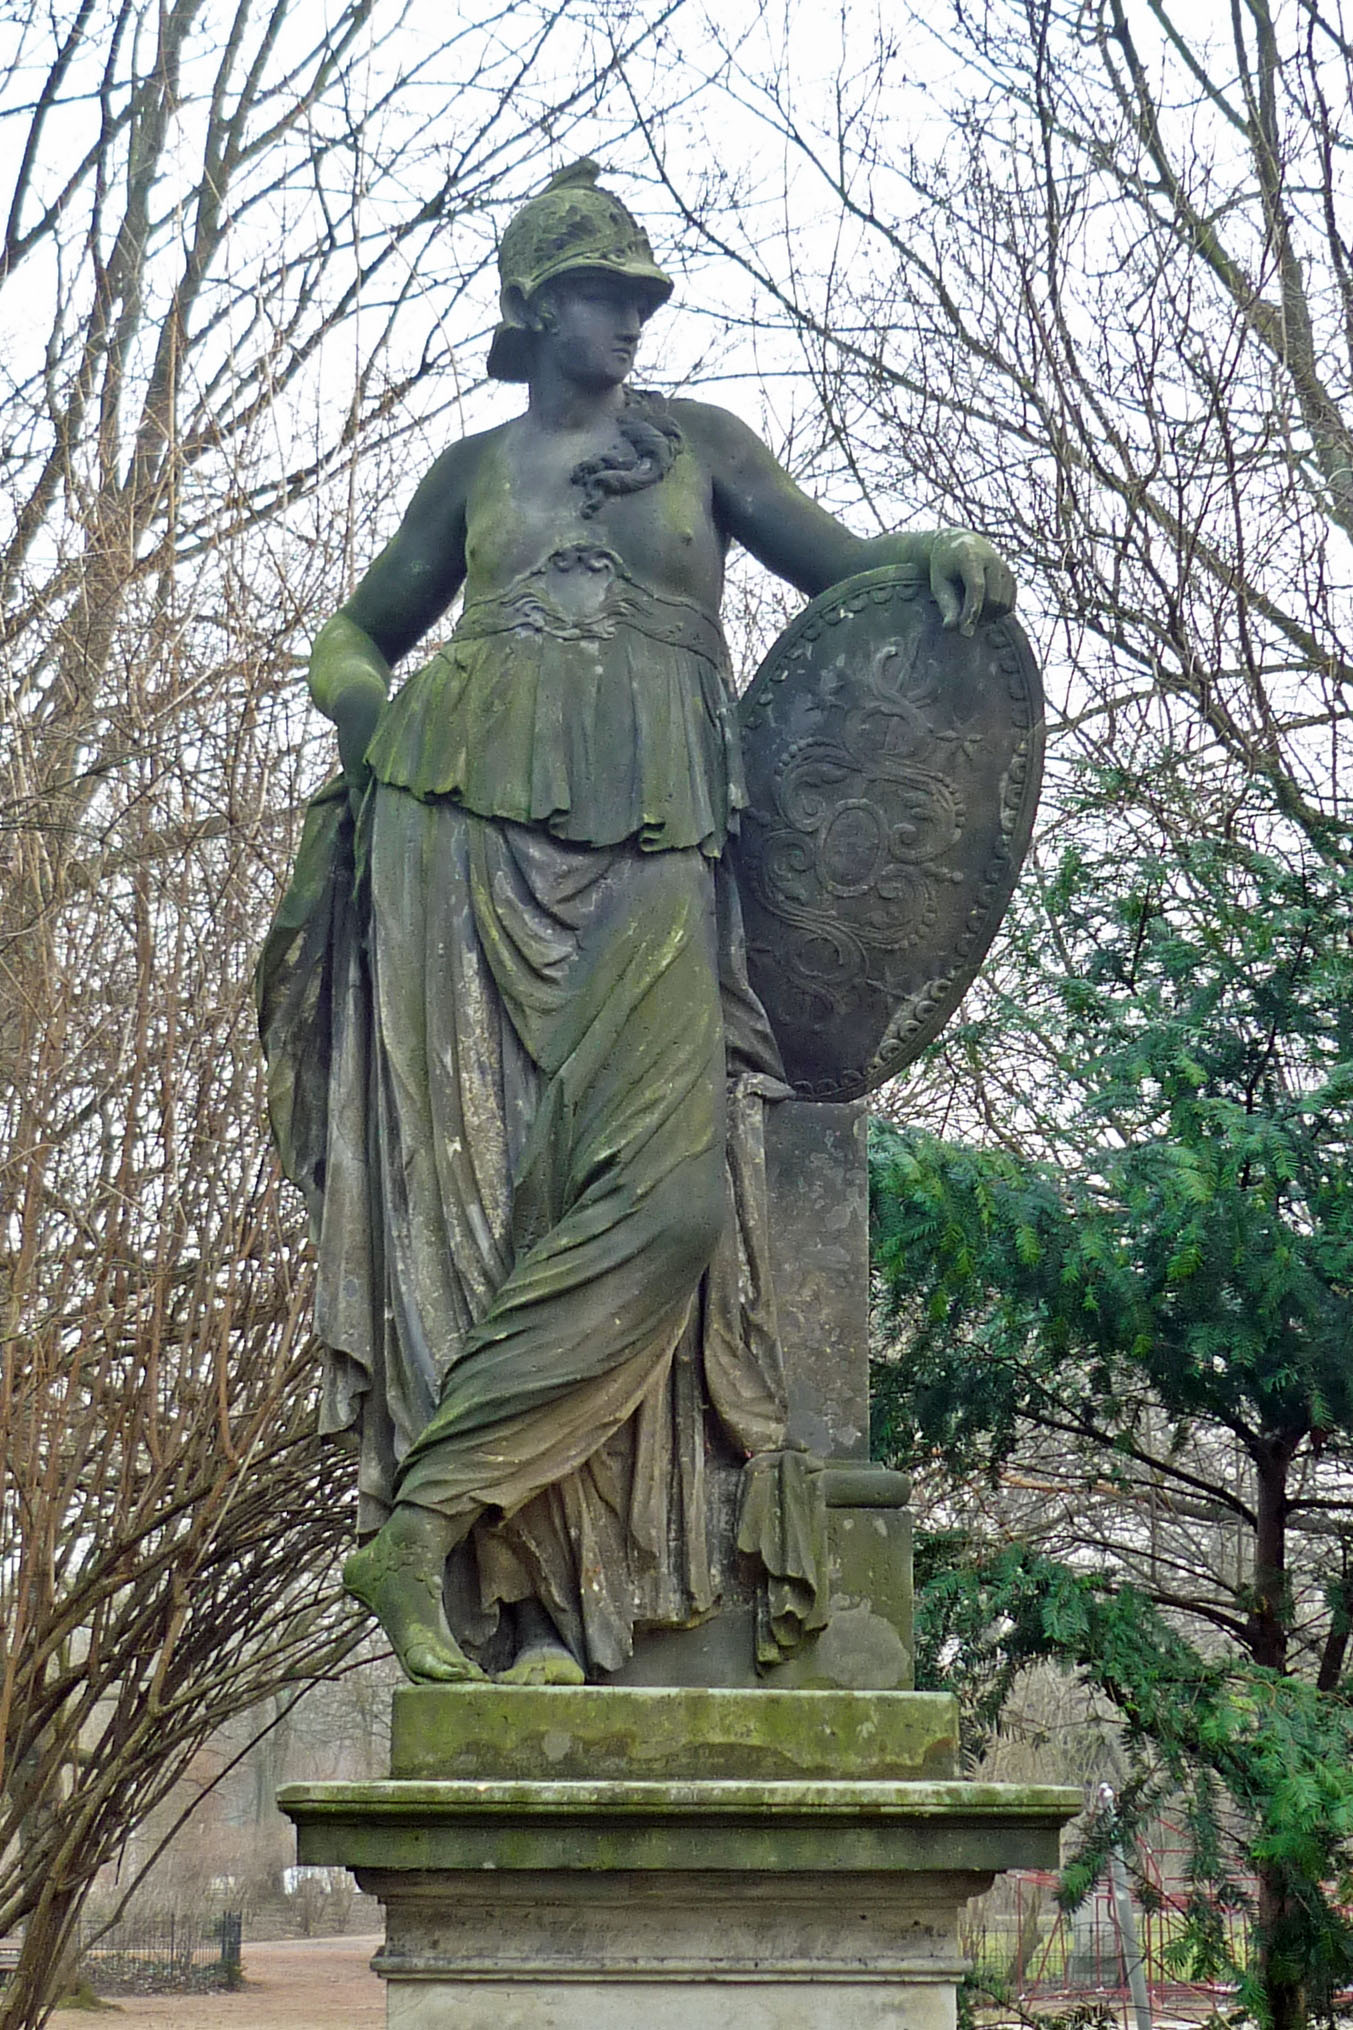 Large public sculpture of woman, bare breasted, wearing long flowing robe and helmet, leaning on a shield